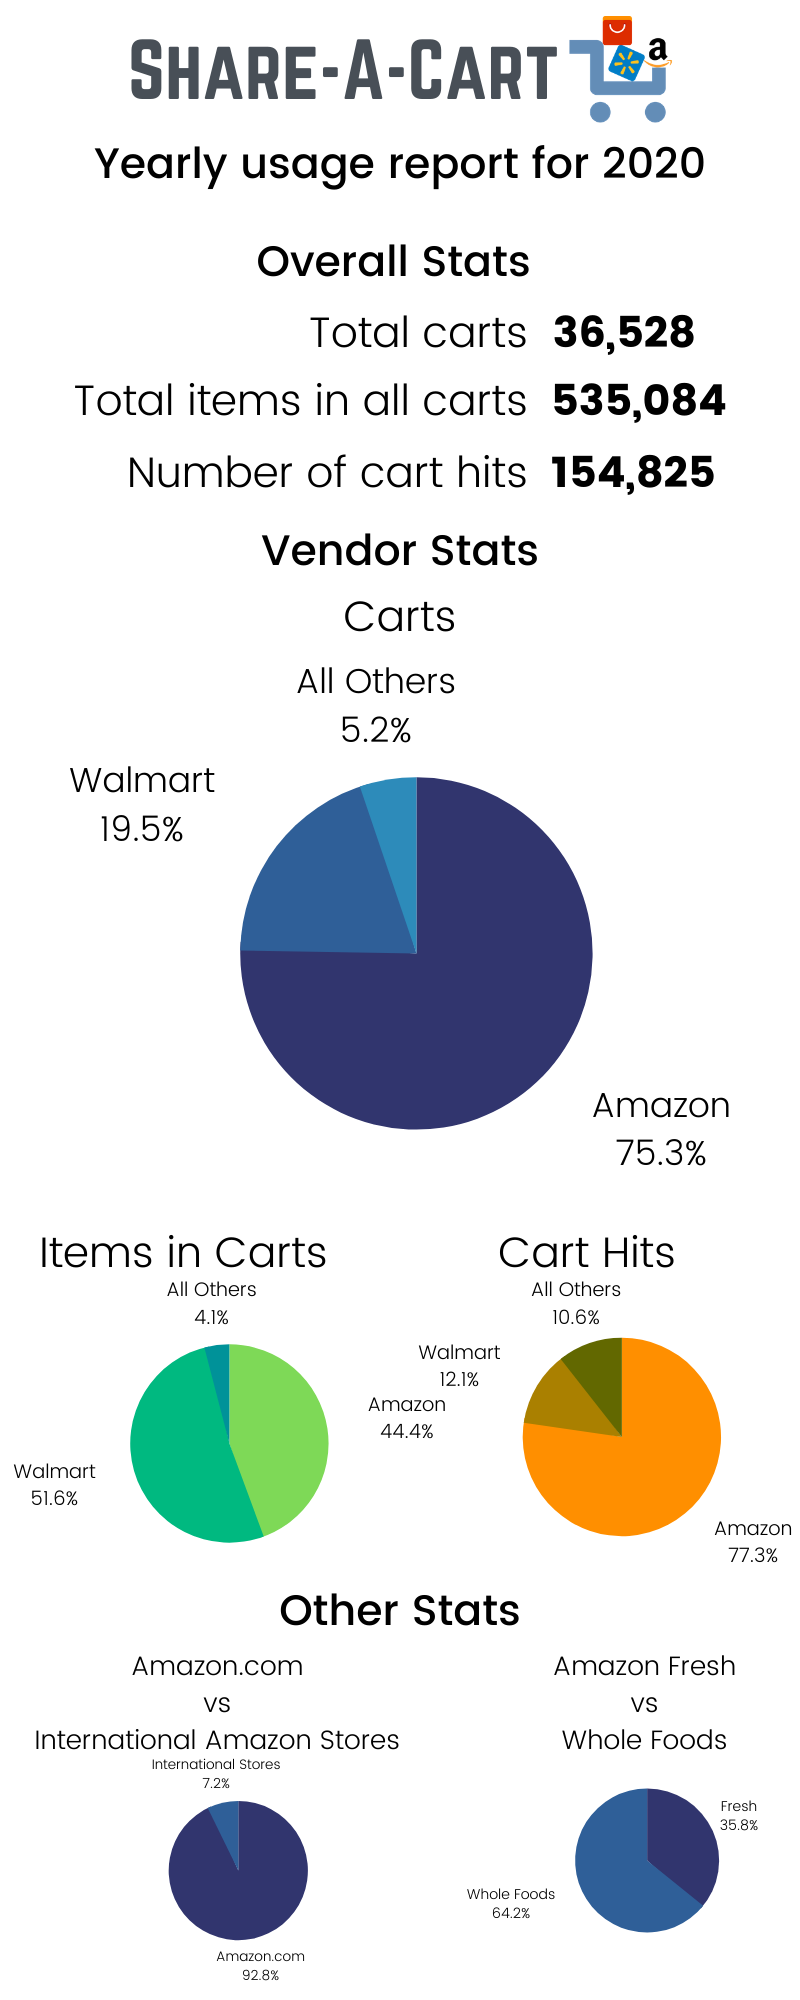 Share-A-Cart year end results for 2020 statistics infographic